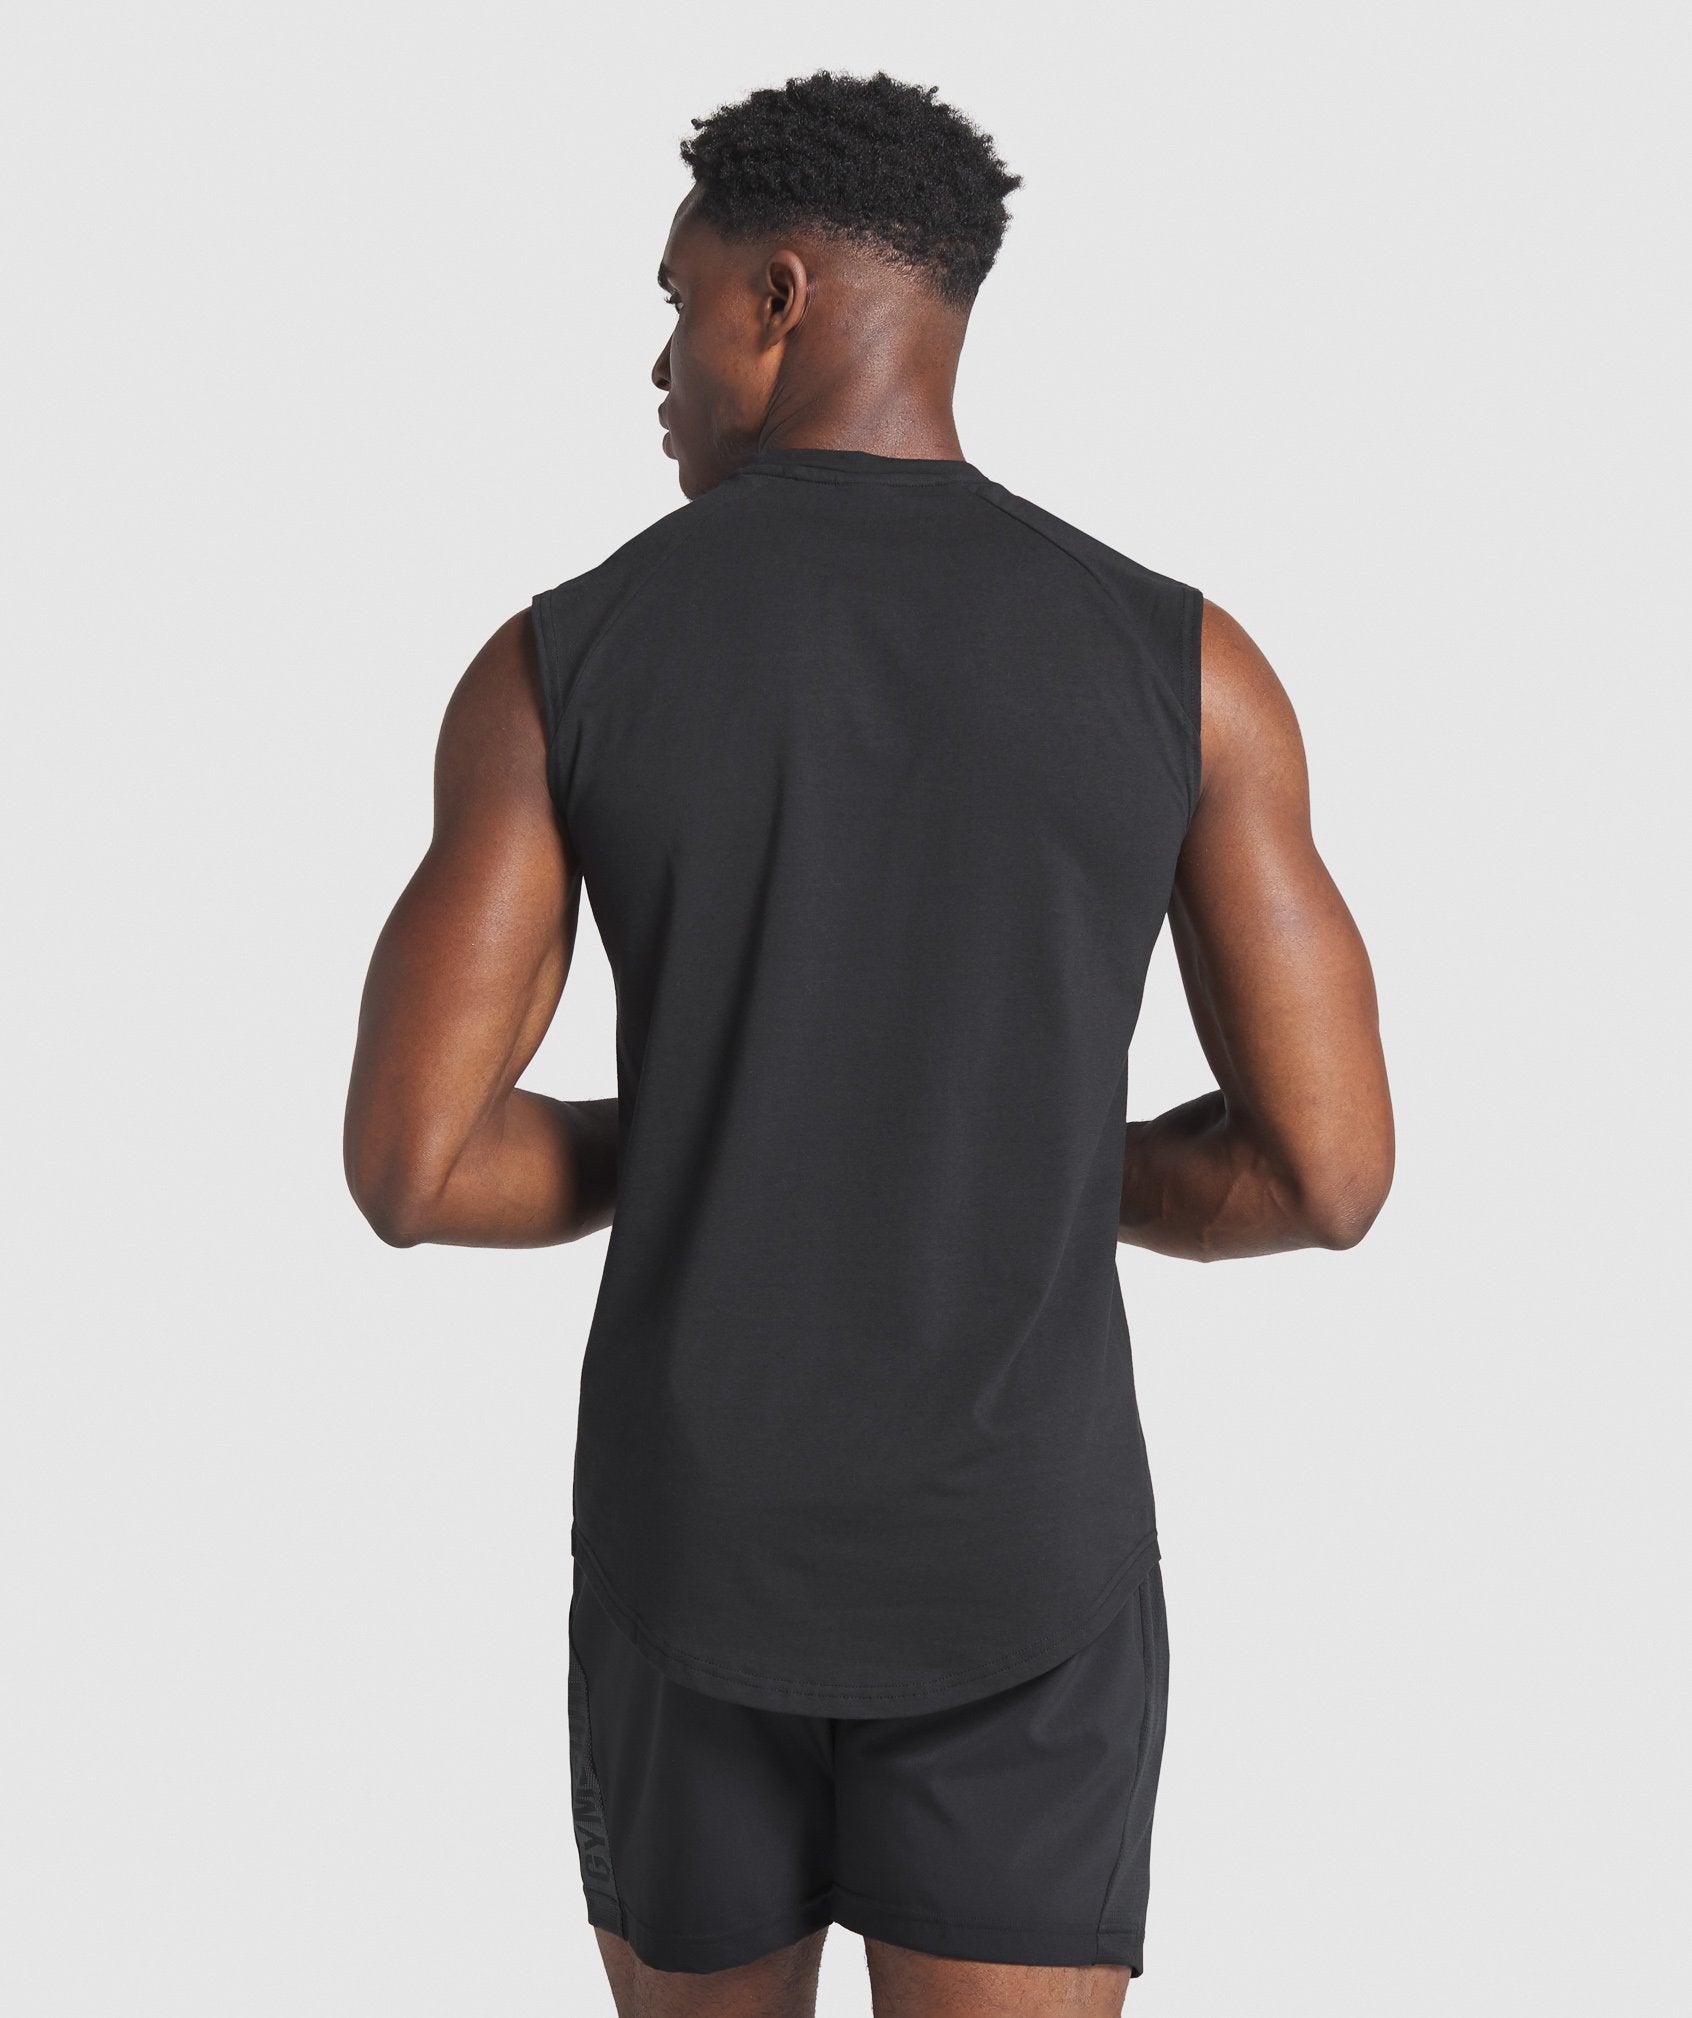 Bold Cut Off Tee in Black - view 4